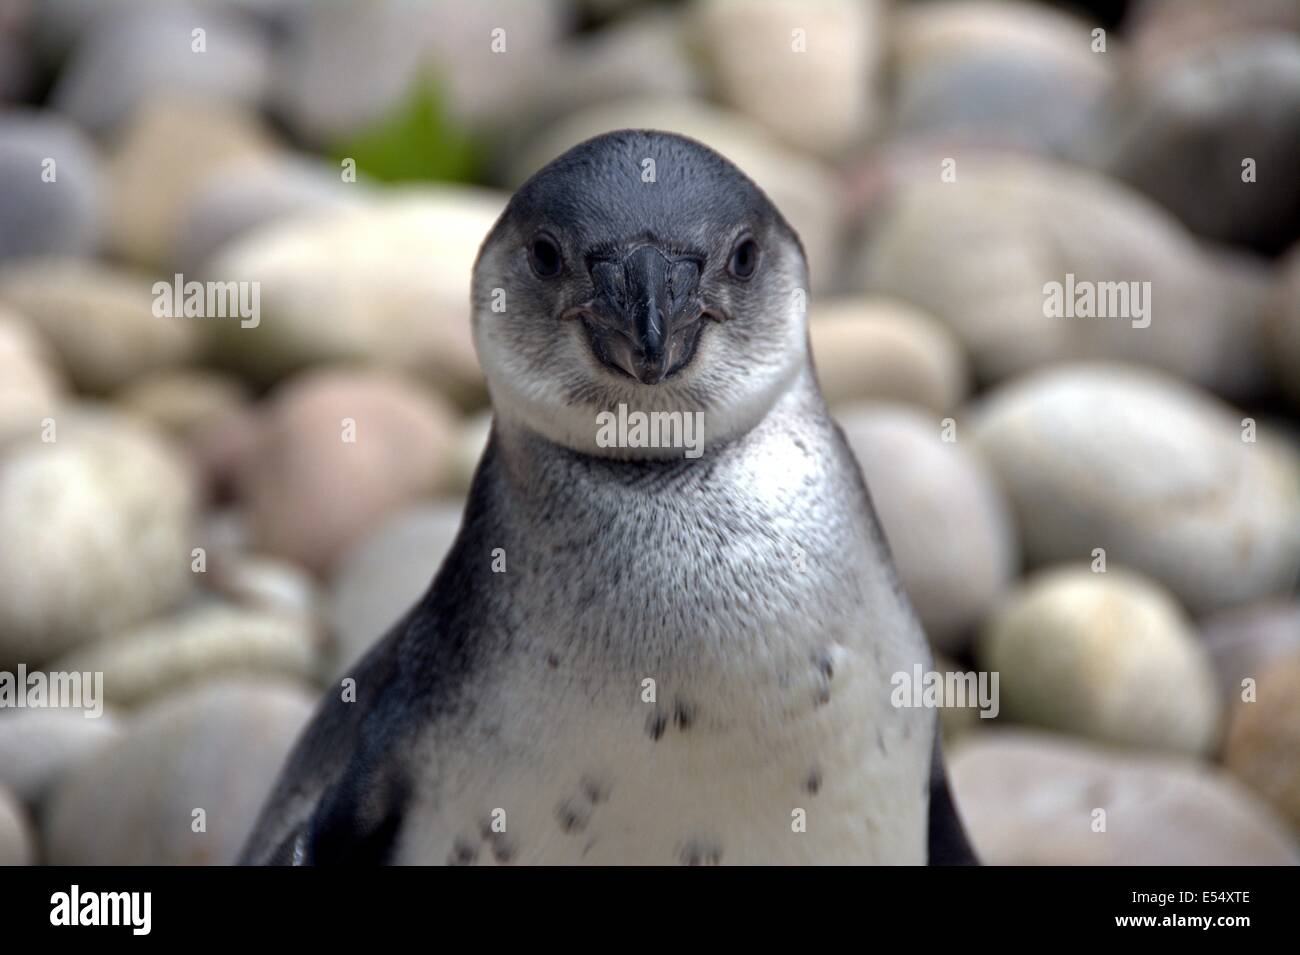 Penguin portrait full face view blurred stones background. Stock Photo